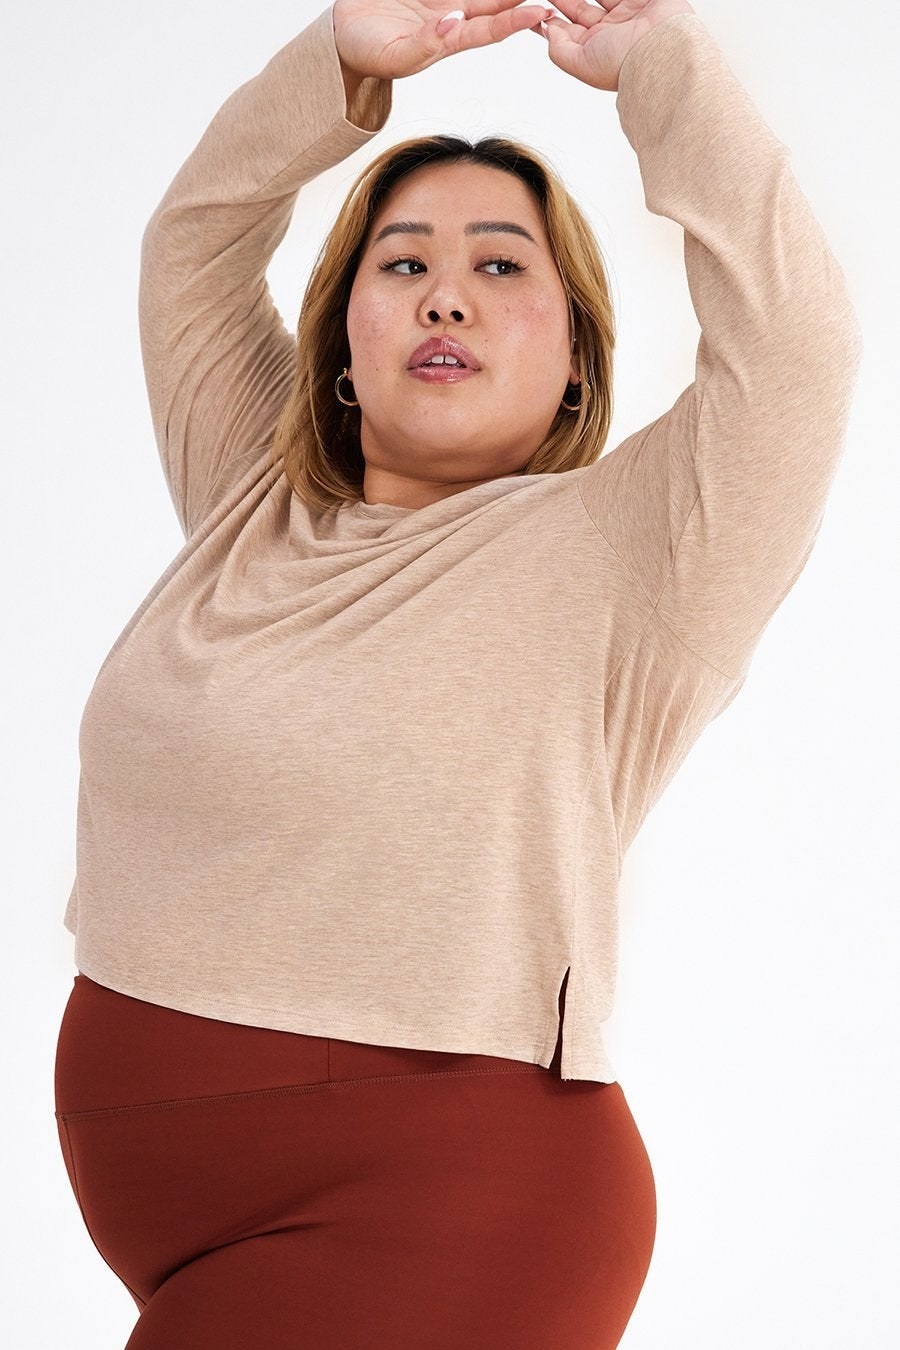 Model is wearing a sand-colored long sleeve tee with a clay-colored pair of exercise shorts